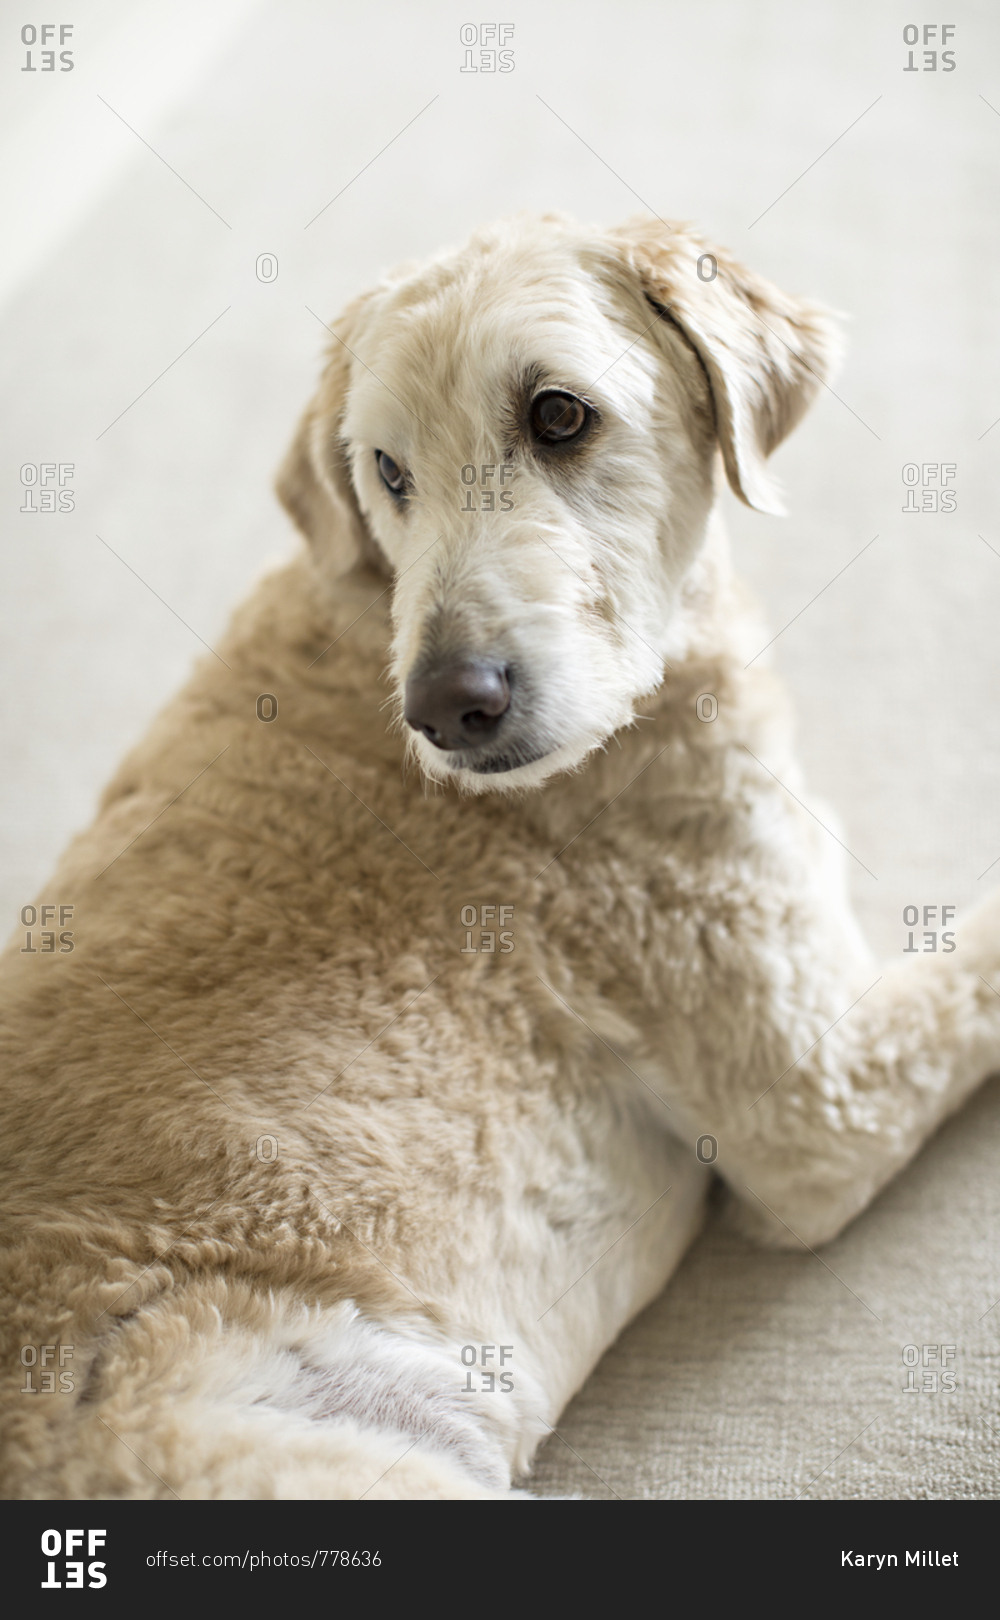 Portrait of a dog with turned head and looking over shoulder